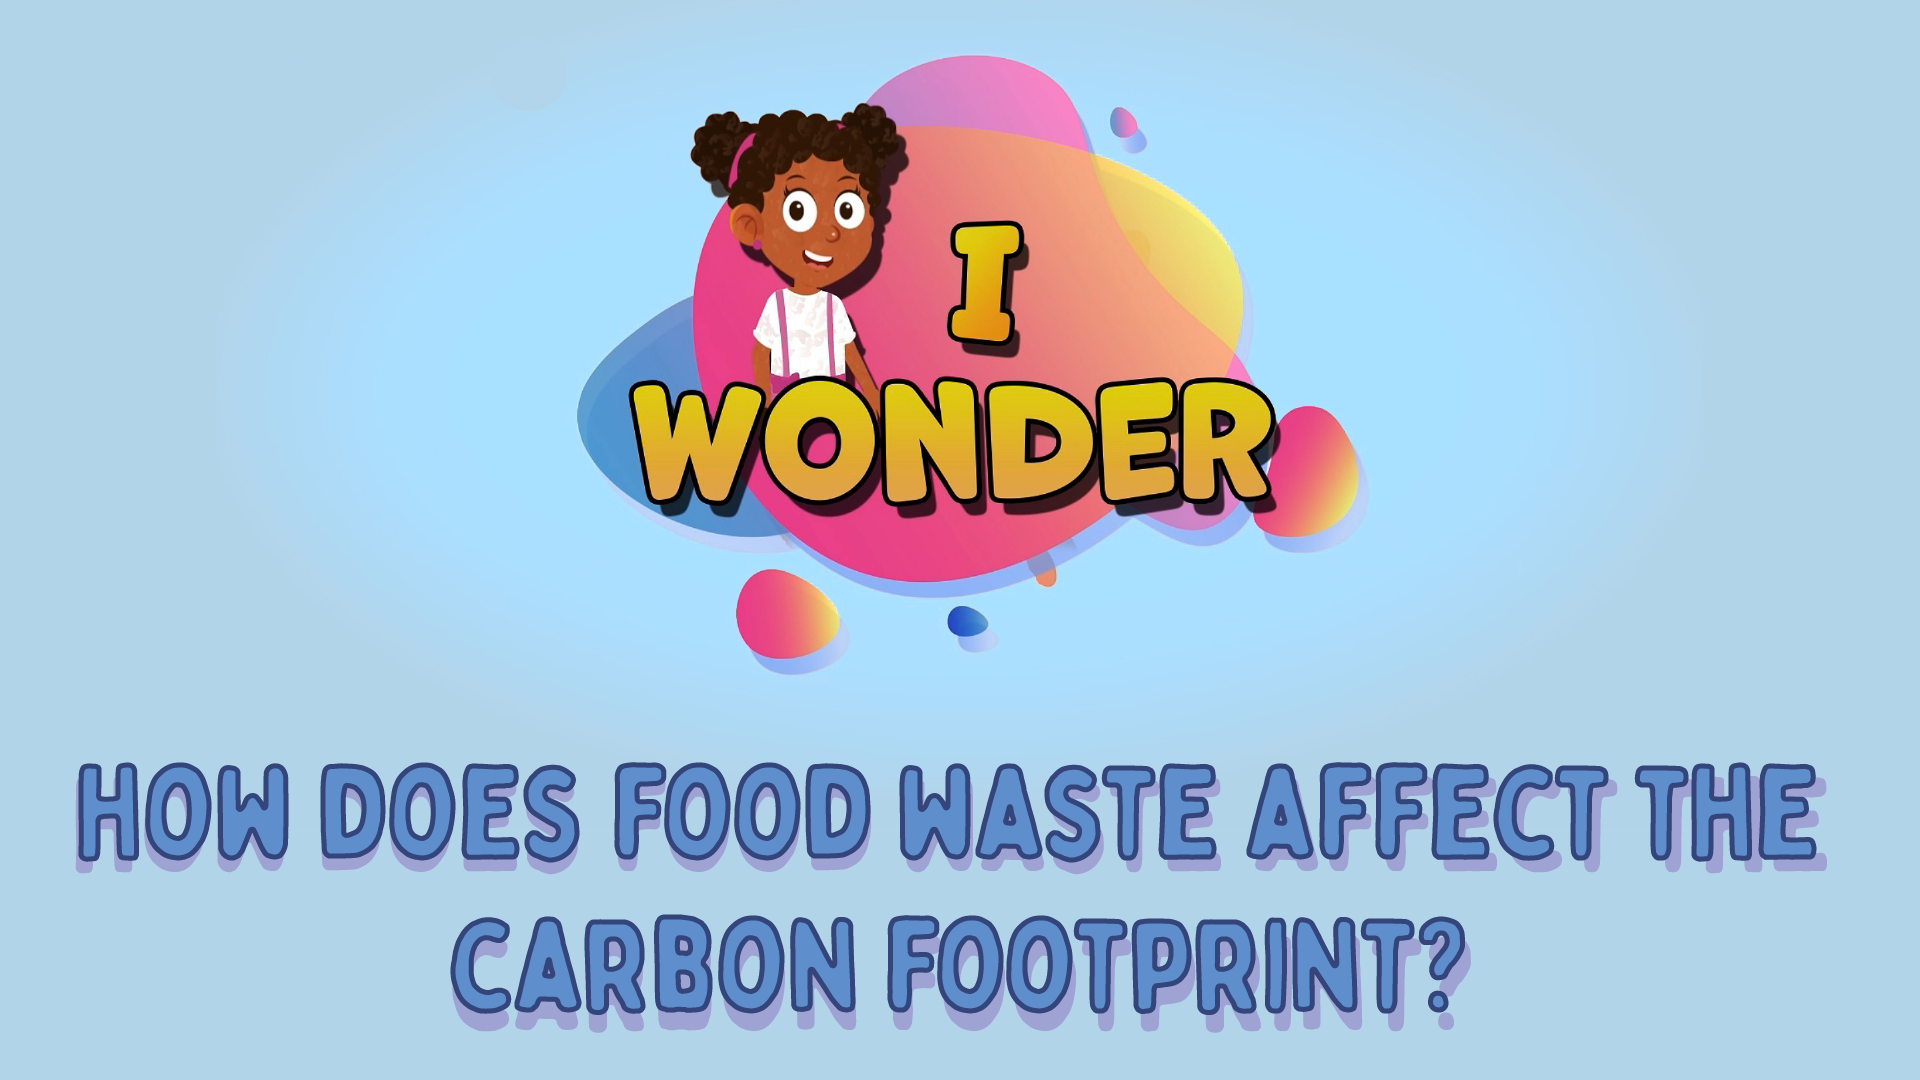 How Does Food Waste Affect The Carbon Footprint?